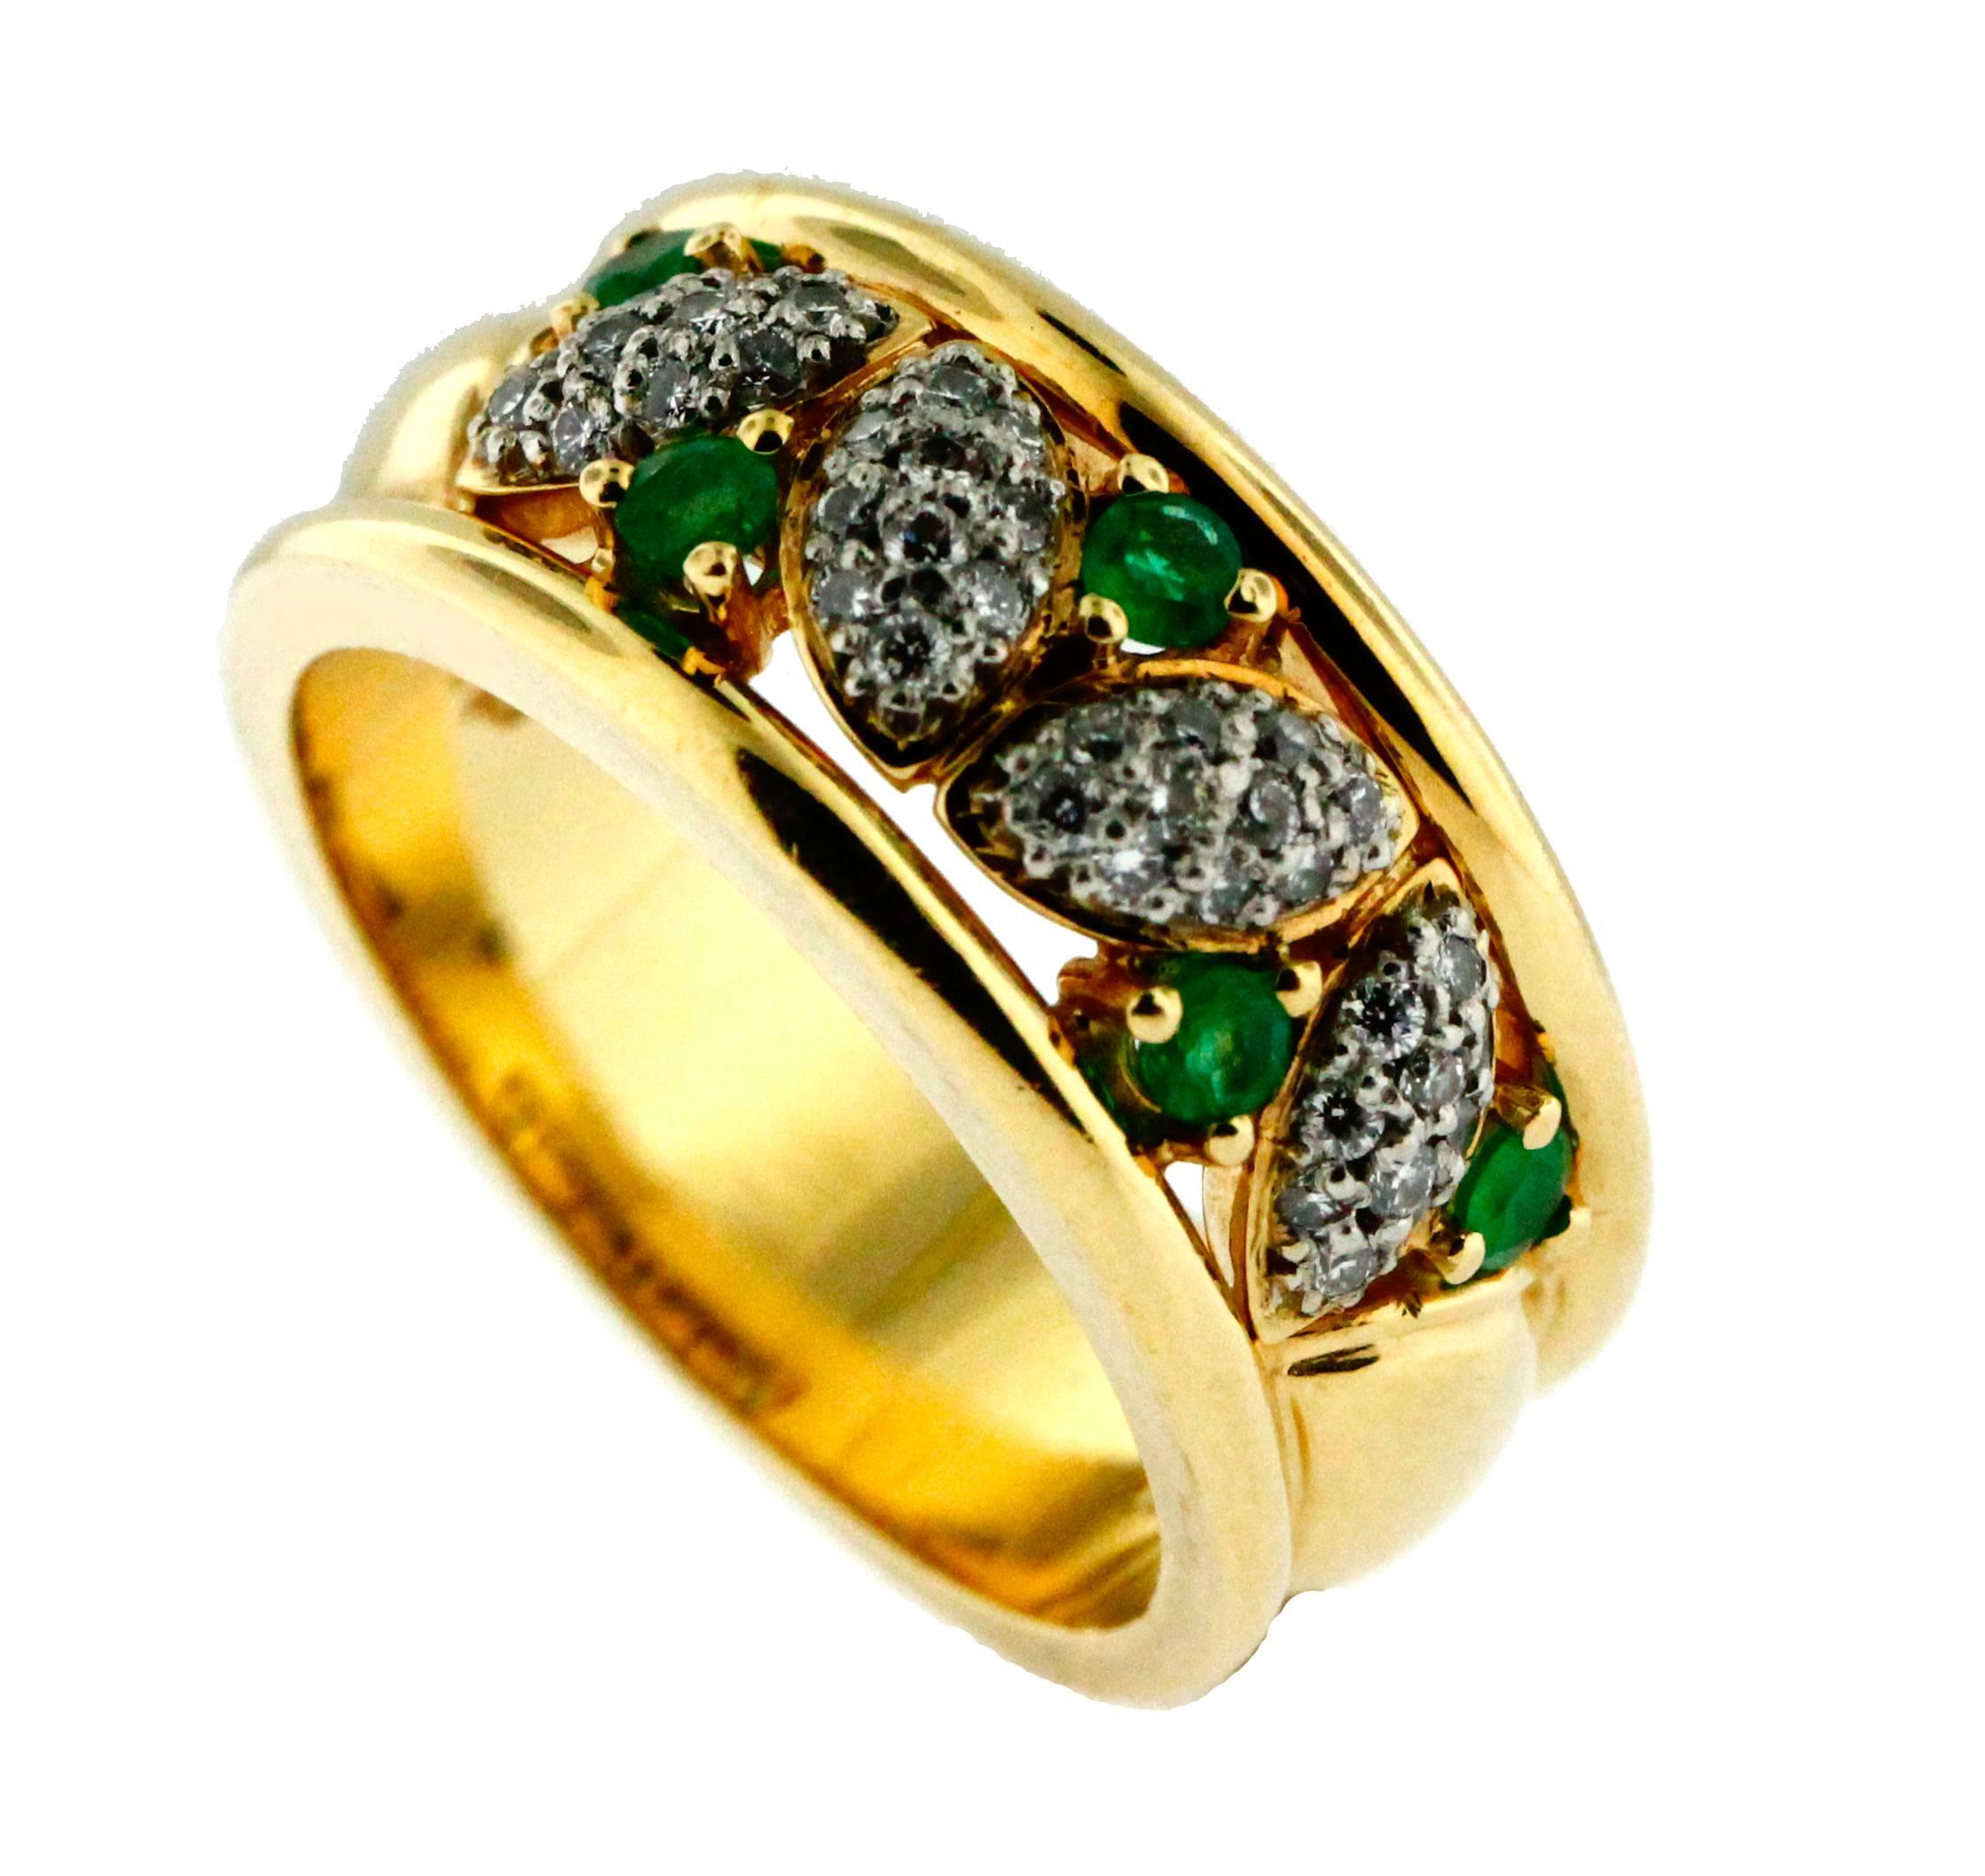 This elegant custom made ring is clearly stamped Birks JF. It was made in Montreal in the Birks factory approximately 25 years ago. It is also clearly stamped 18KT and platinum. The five mixed cut emeralds are vibrant with a slightly yellowish green